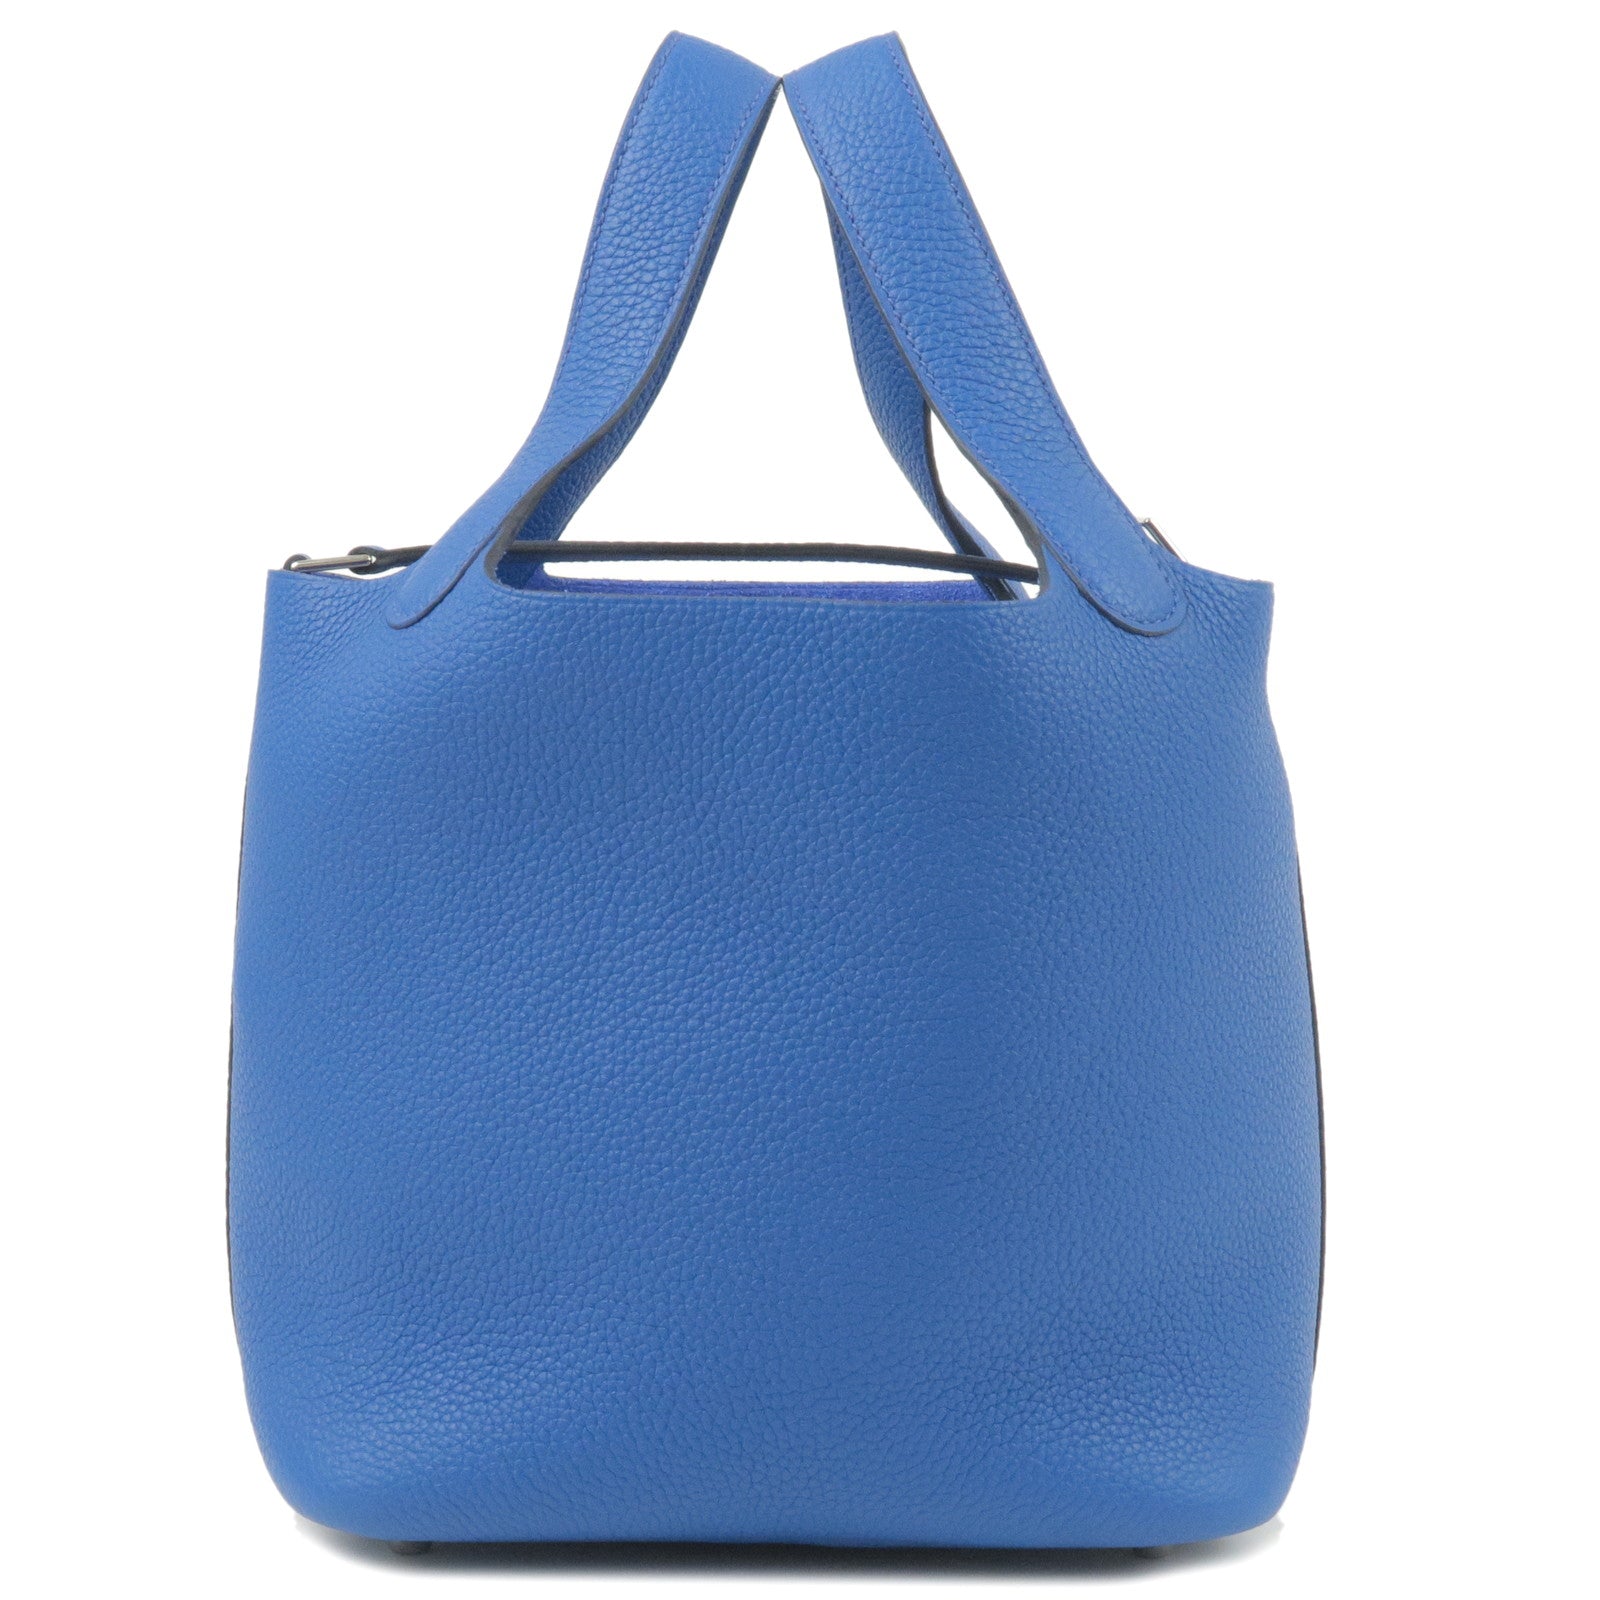 HERMES-Leather-Picotin-Lock-PM-Hand-Bag-Z-Engrave-SHW-Blue